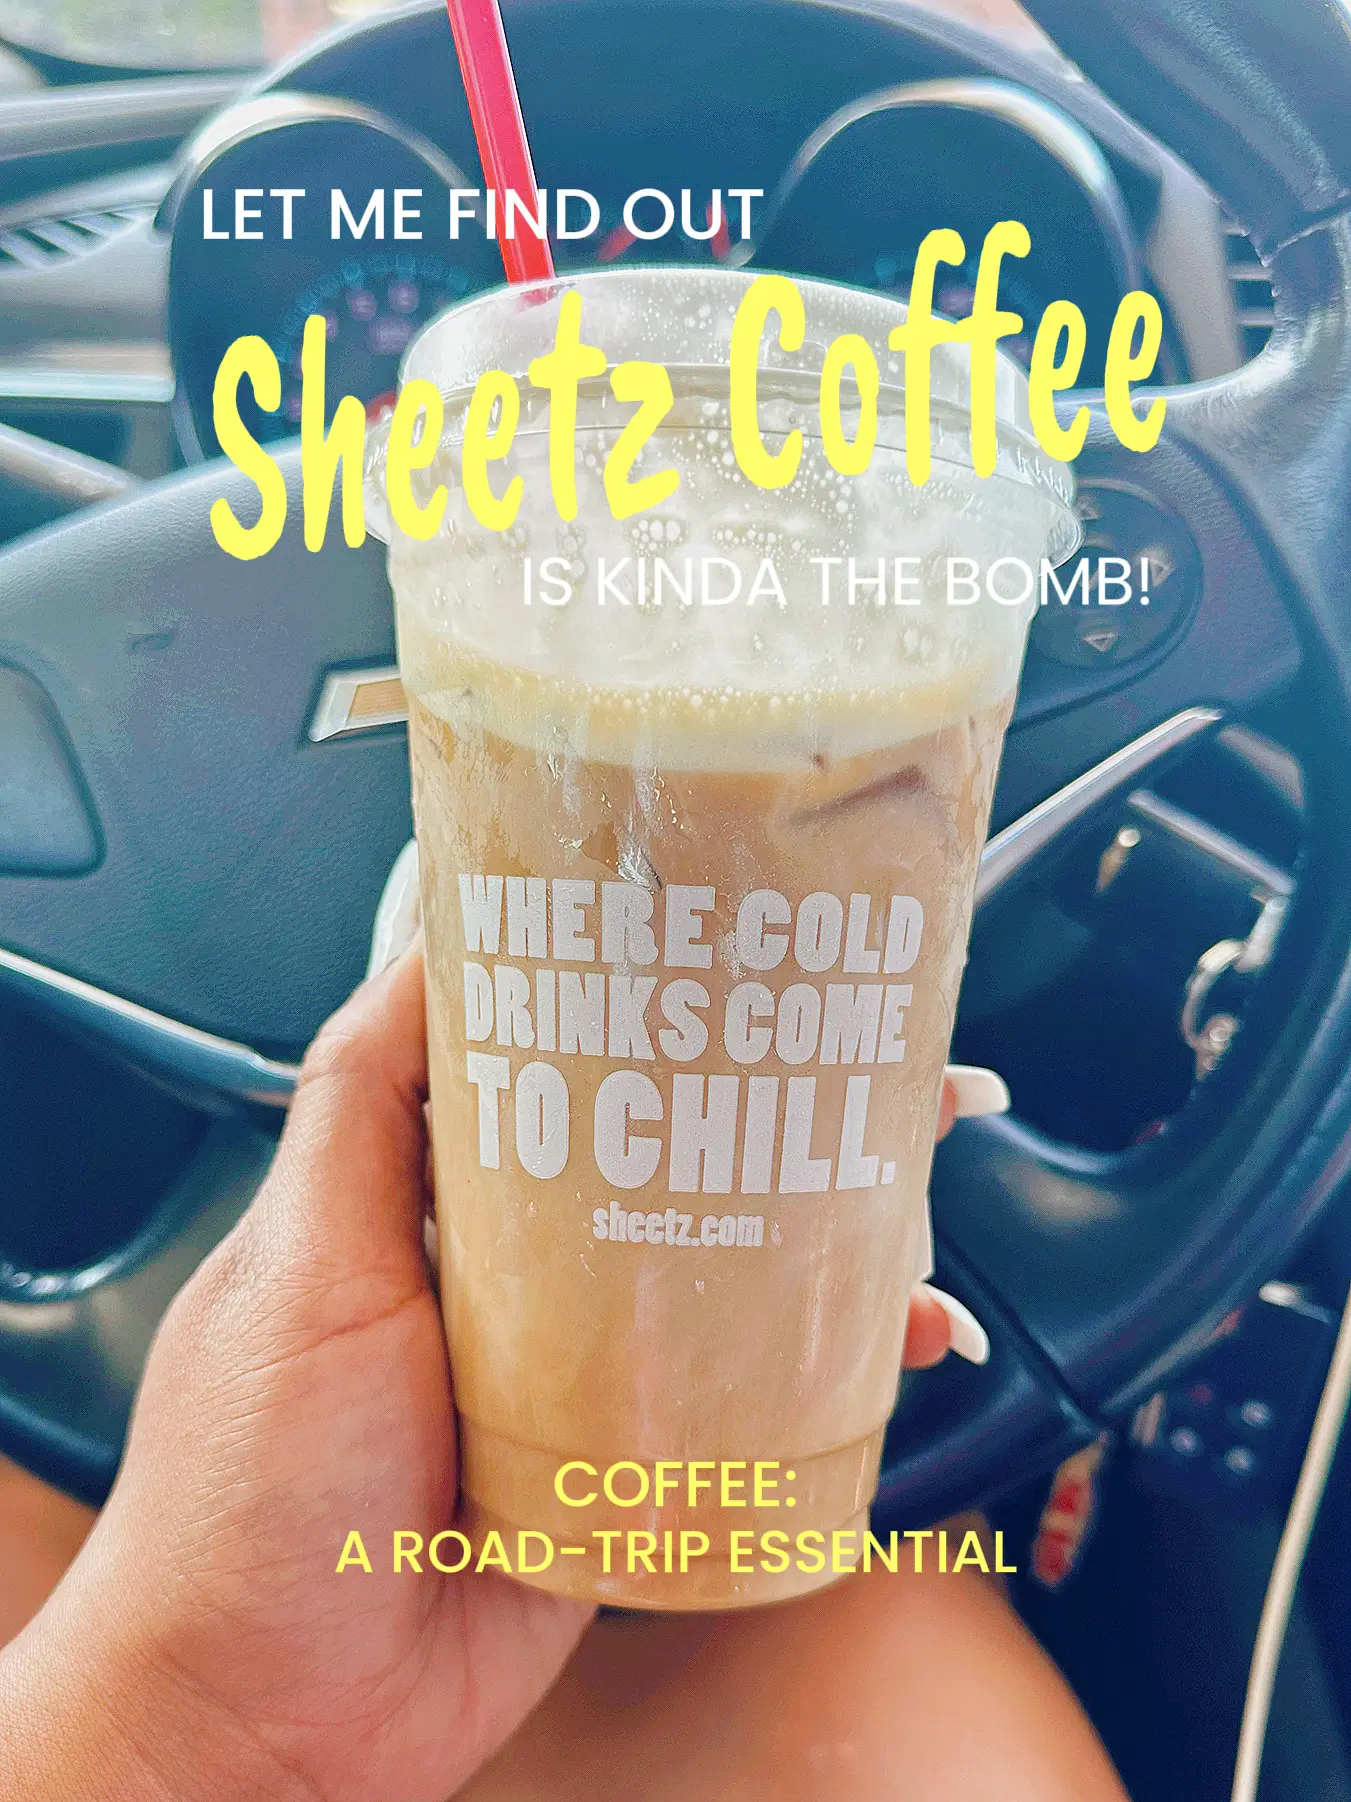 Sheetz Cold Brew! ☕️, Gallery posted by Courtney Renee